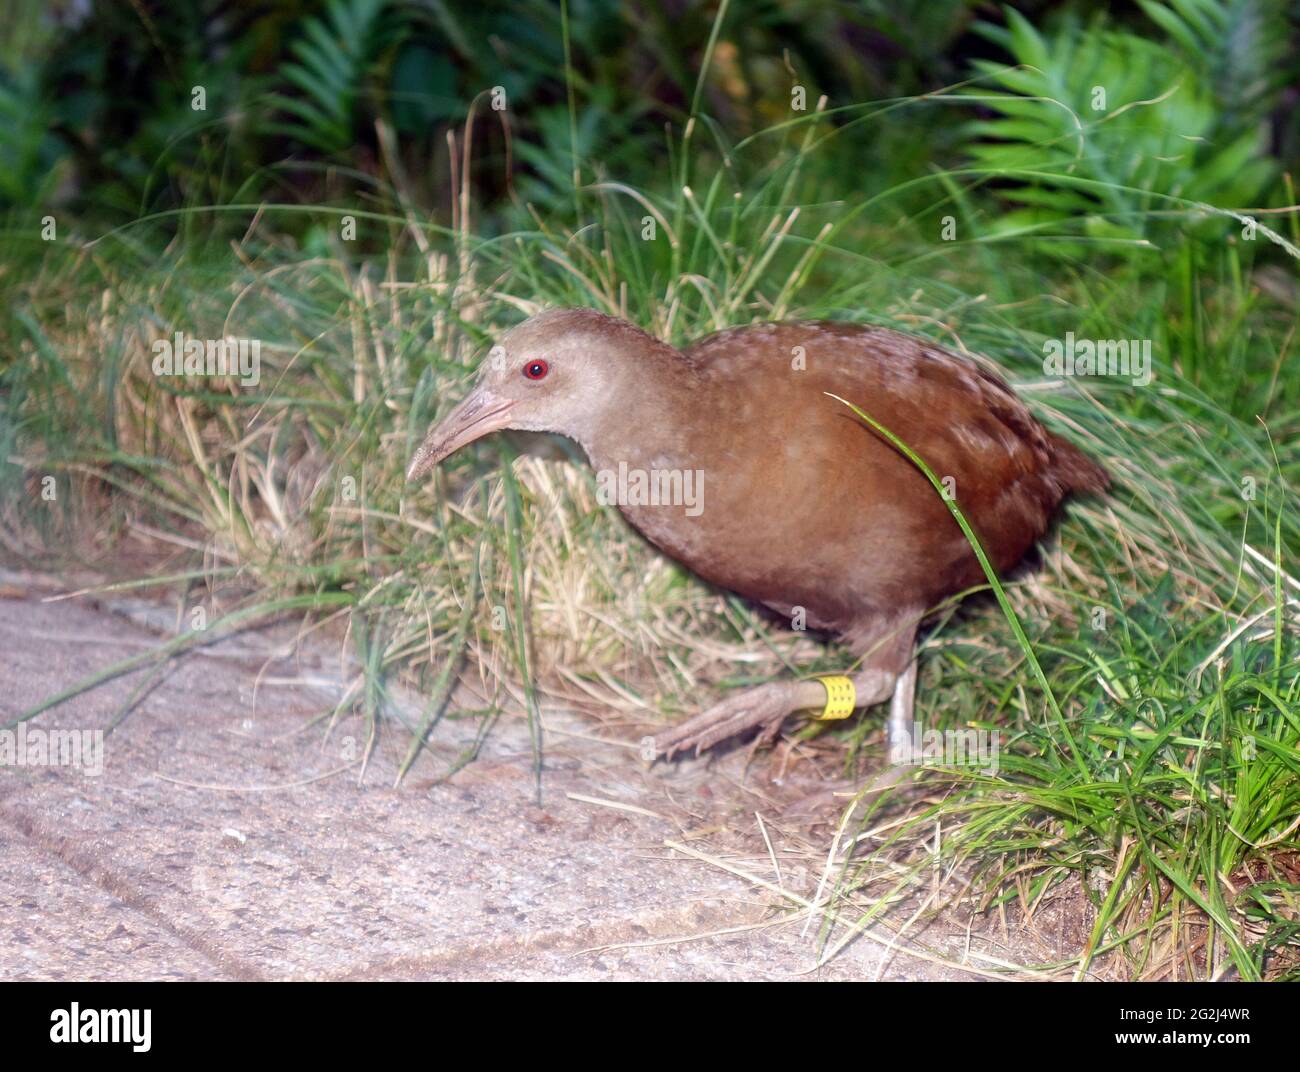 Woodhen (Hypotaenidia sylvestris) now so numerous in the Settlement they are underfoot, Lord Howe Island, NSW, Australia Stock Photo